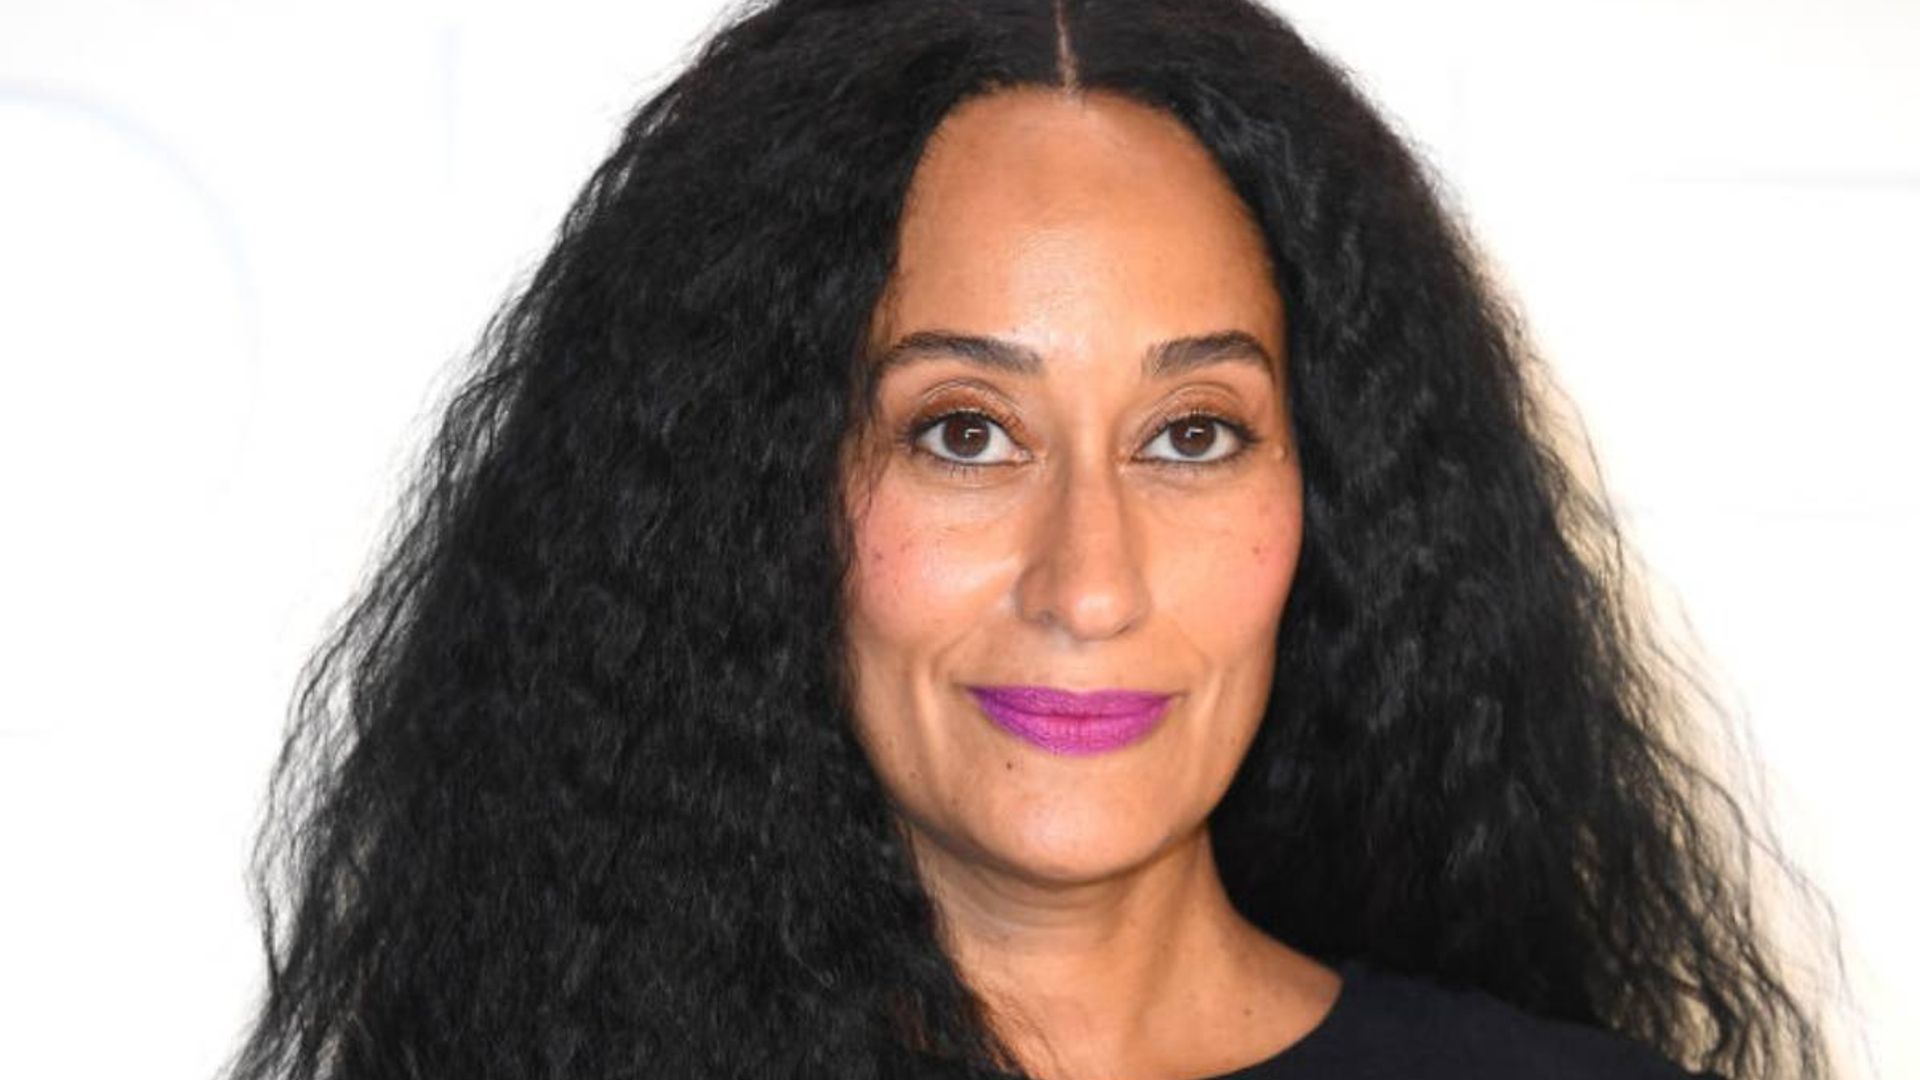 Tracee Ellis Ross with blonde hair has to be seen to be believed